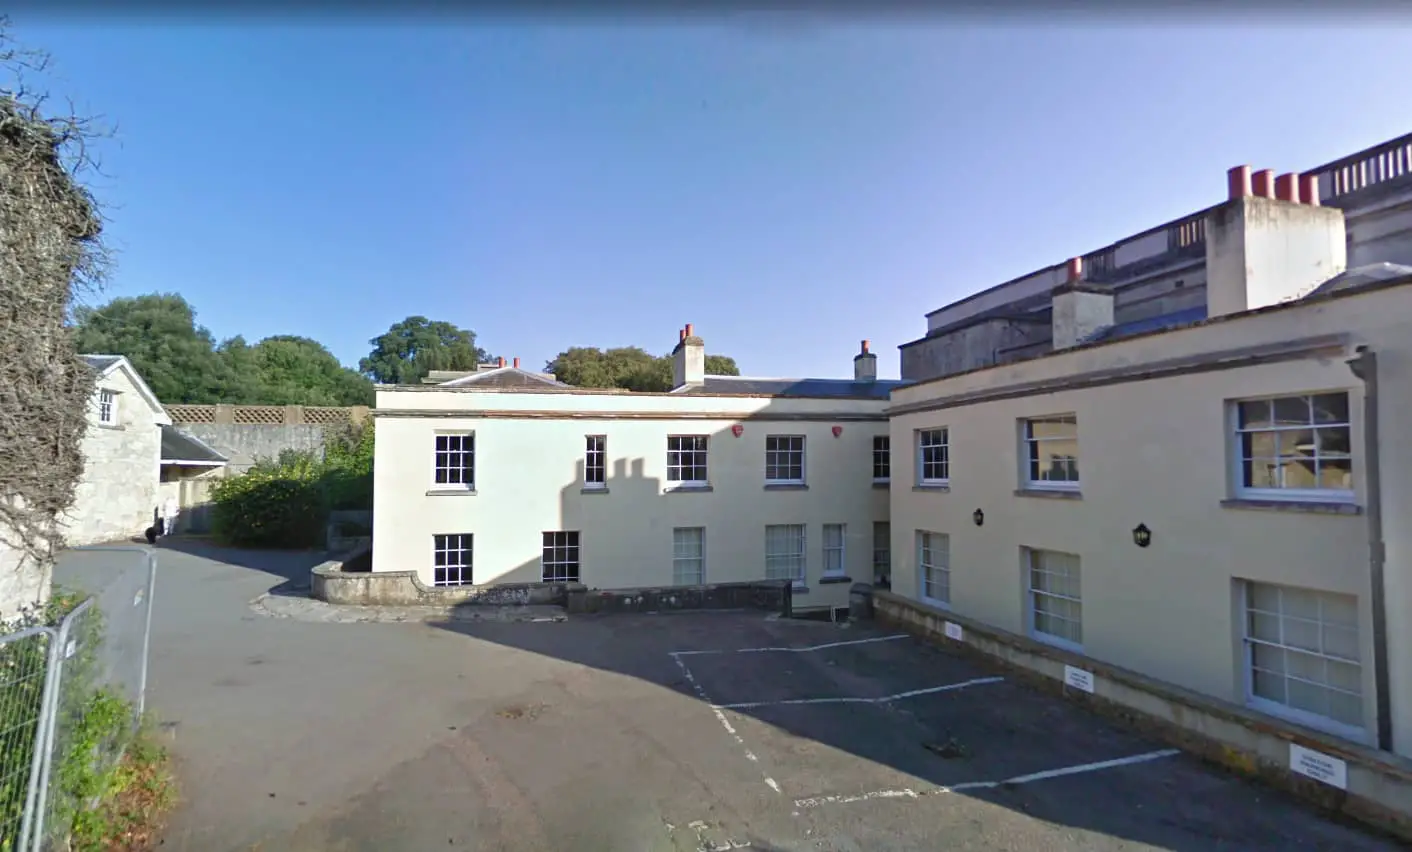 Northwood House buildings under planning application